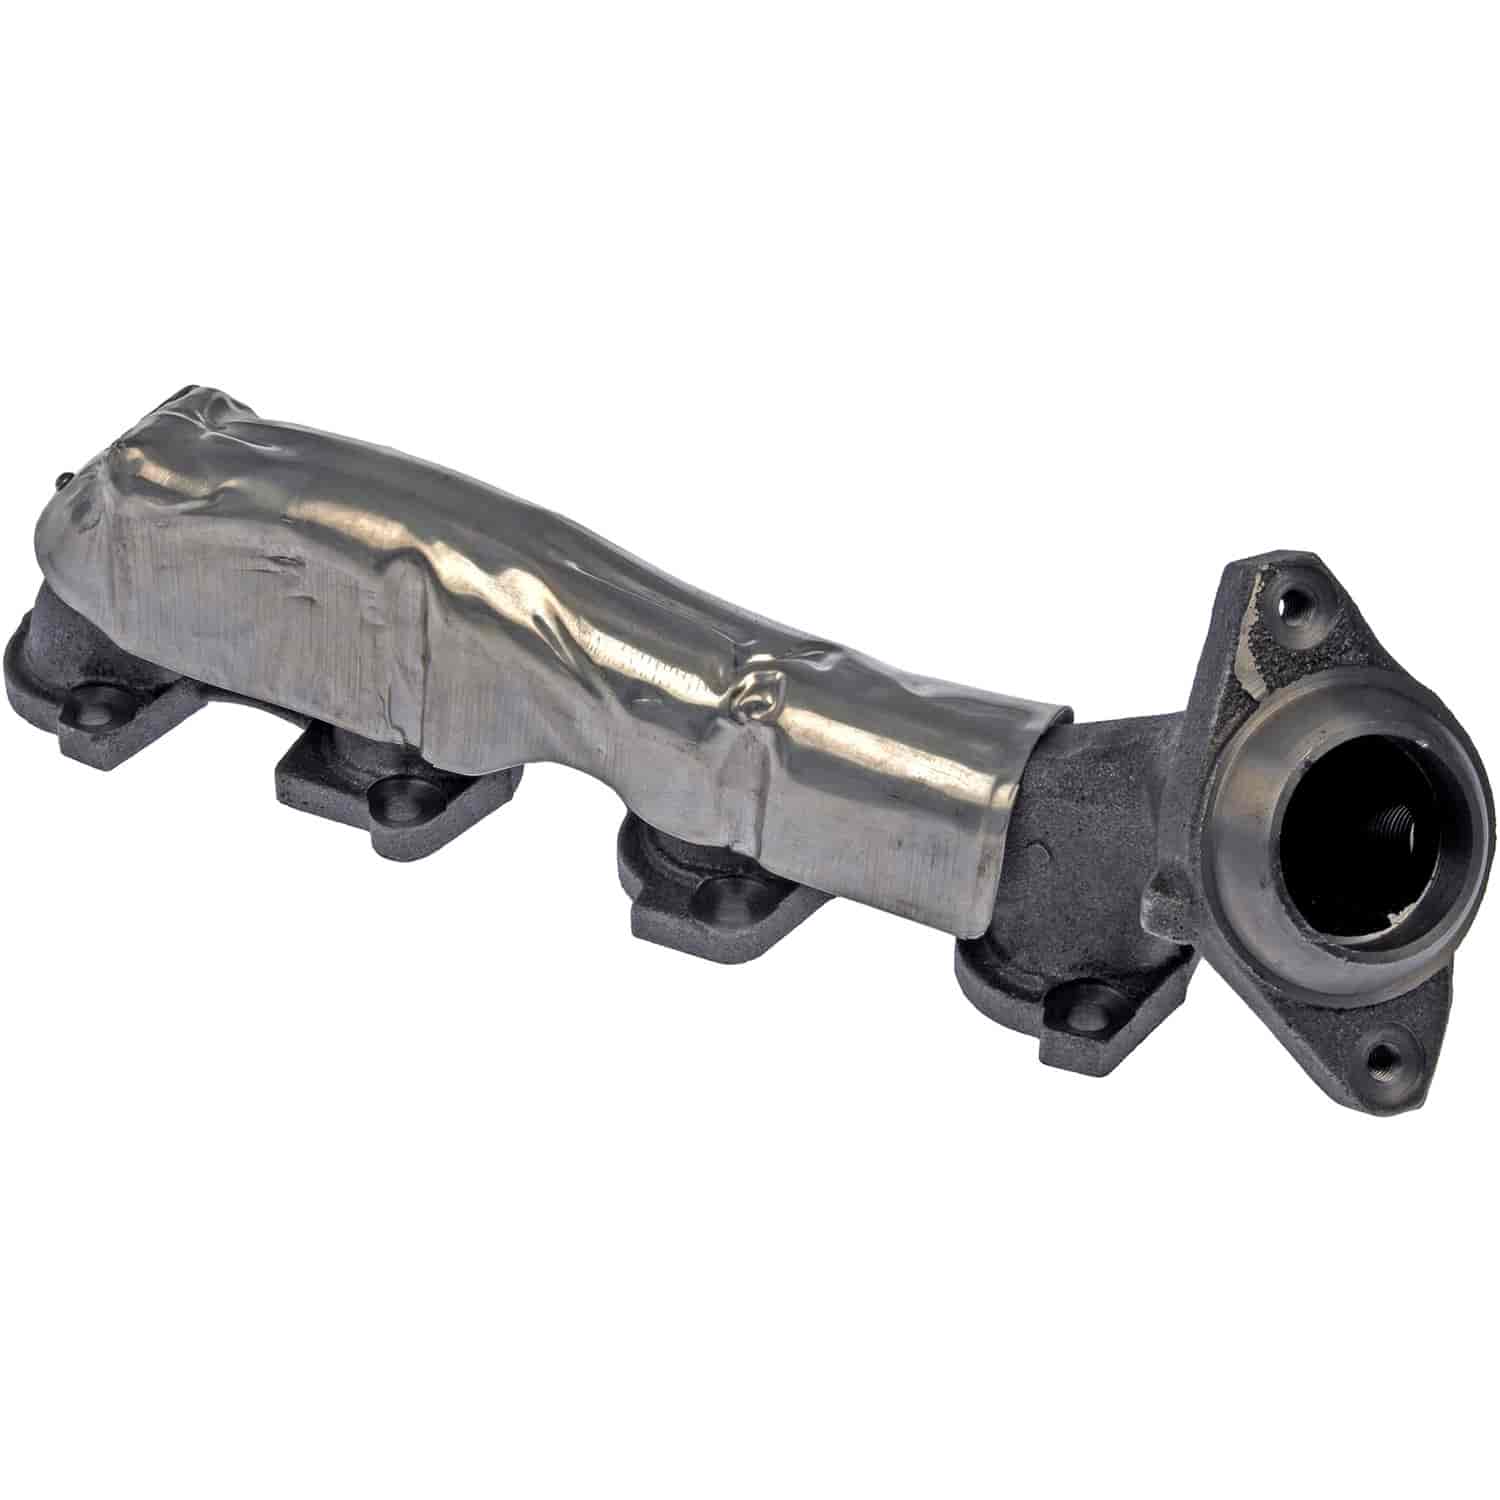 674-904 Cast-Iron Exhaust Manifold for 2003-2011, Ford Crown Victoria, Mercury Grand Marquis, Lincoln Town Car [Left/Driver]